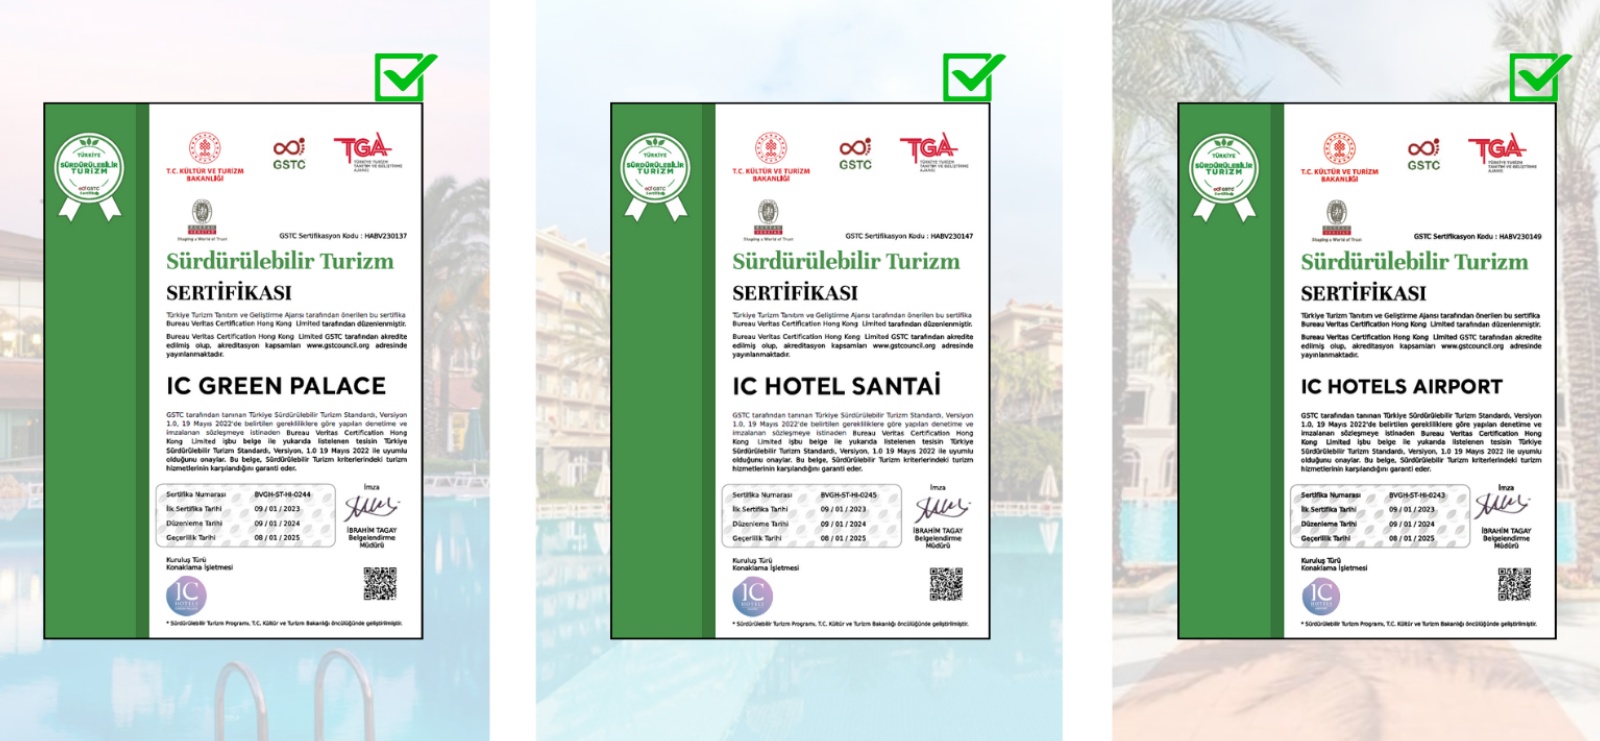 IC Hotels received approval from GSTC audits once again